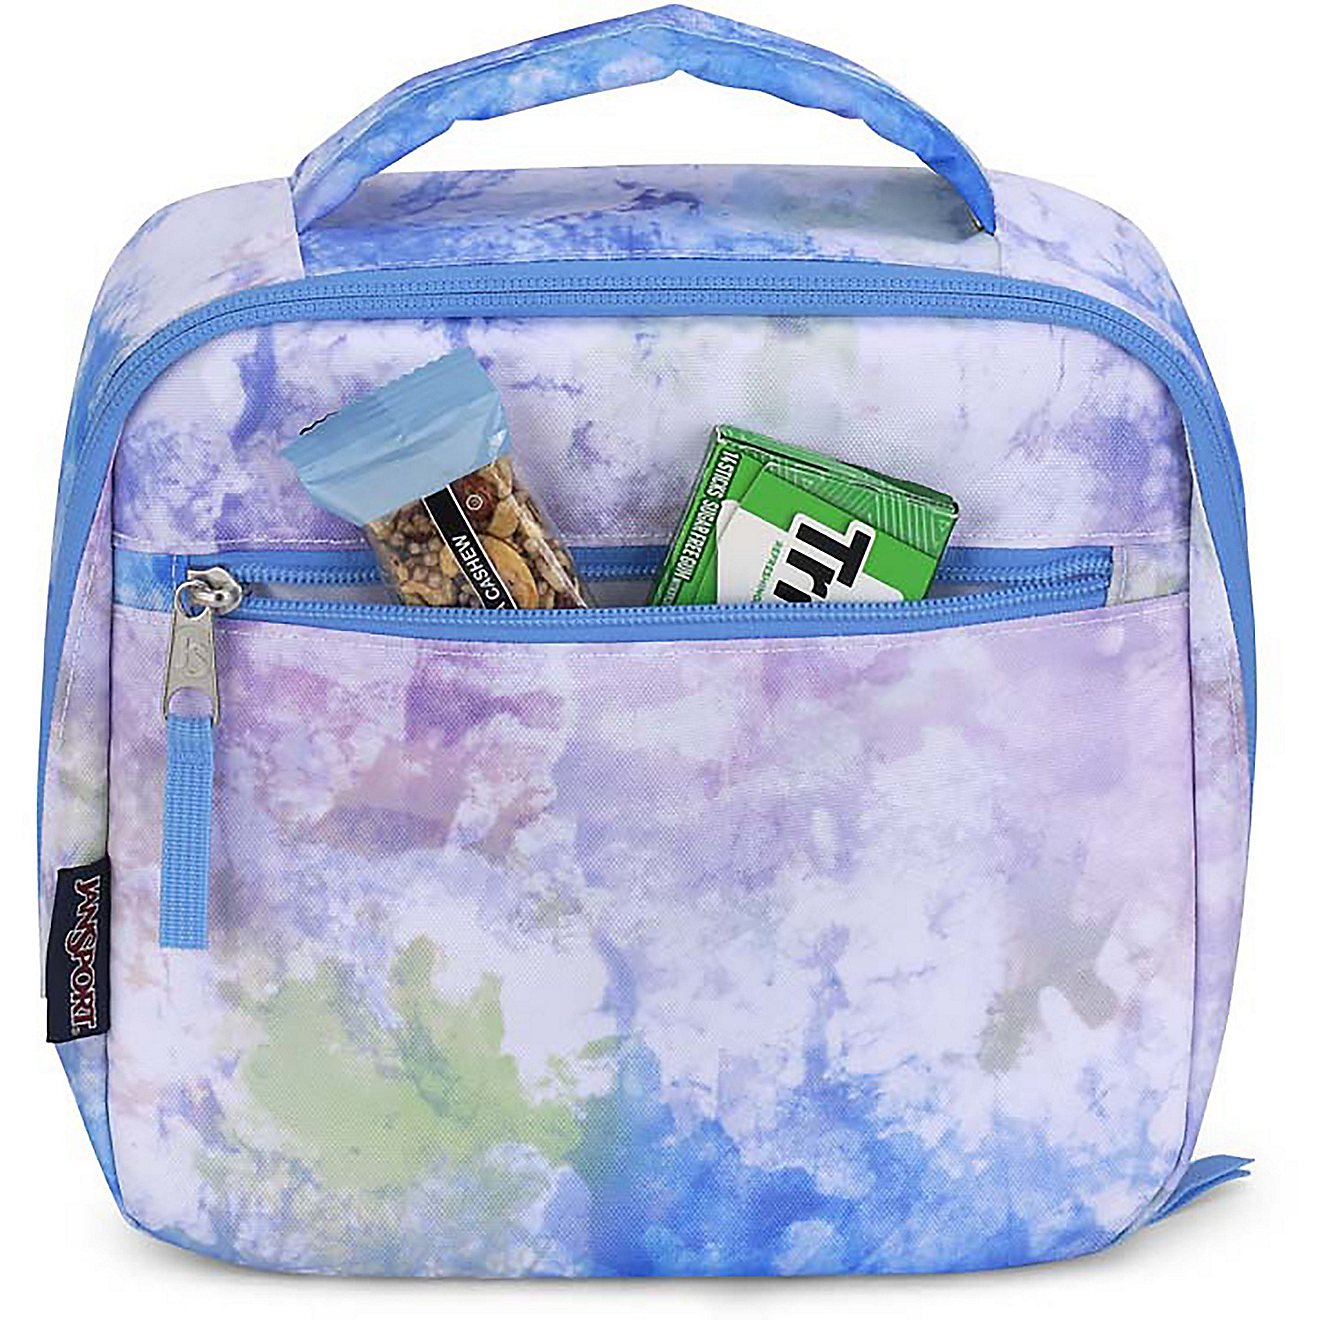 JanSport Lunch Break Insulated Lunch Tote                                                                                        - view number 4